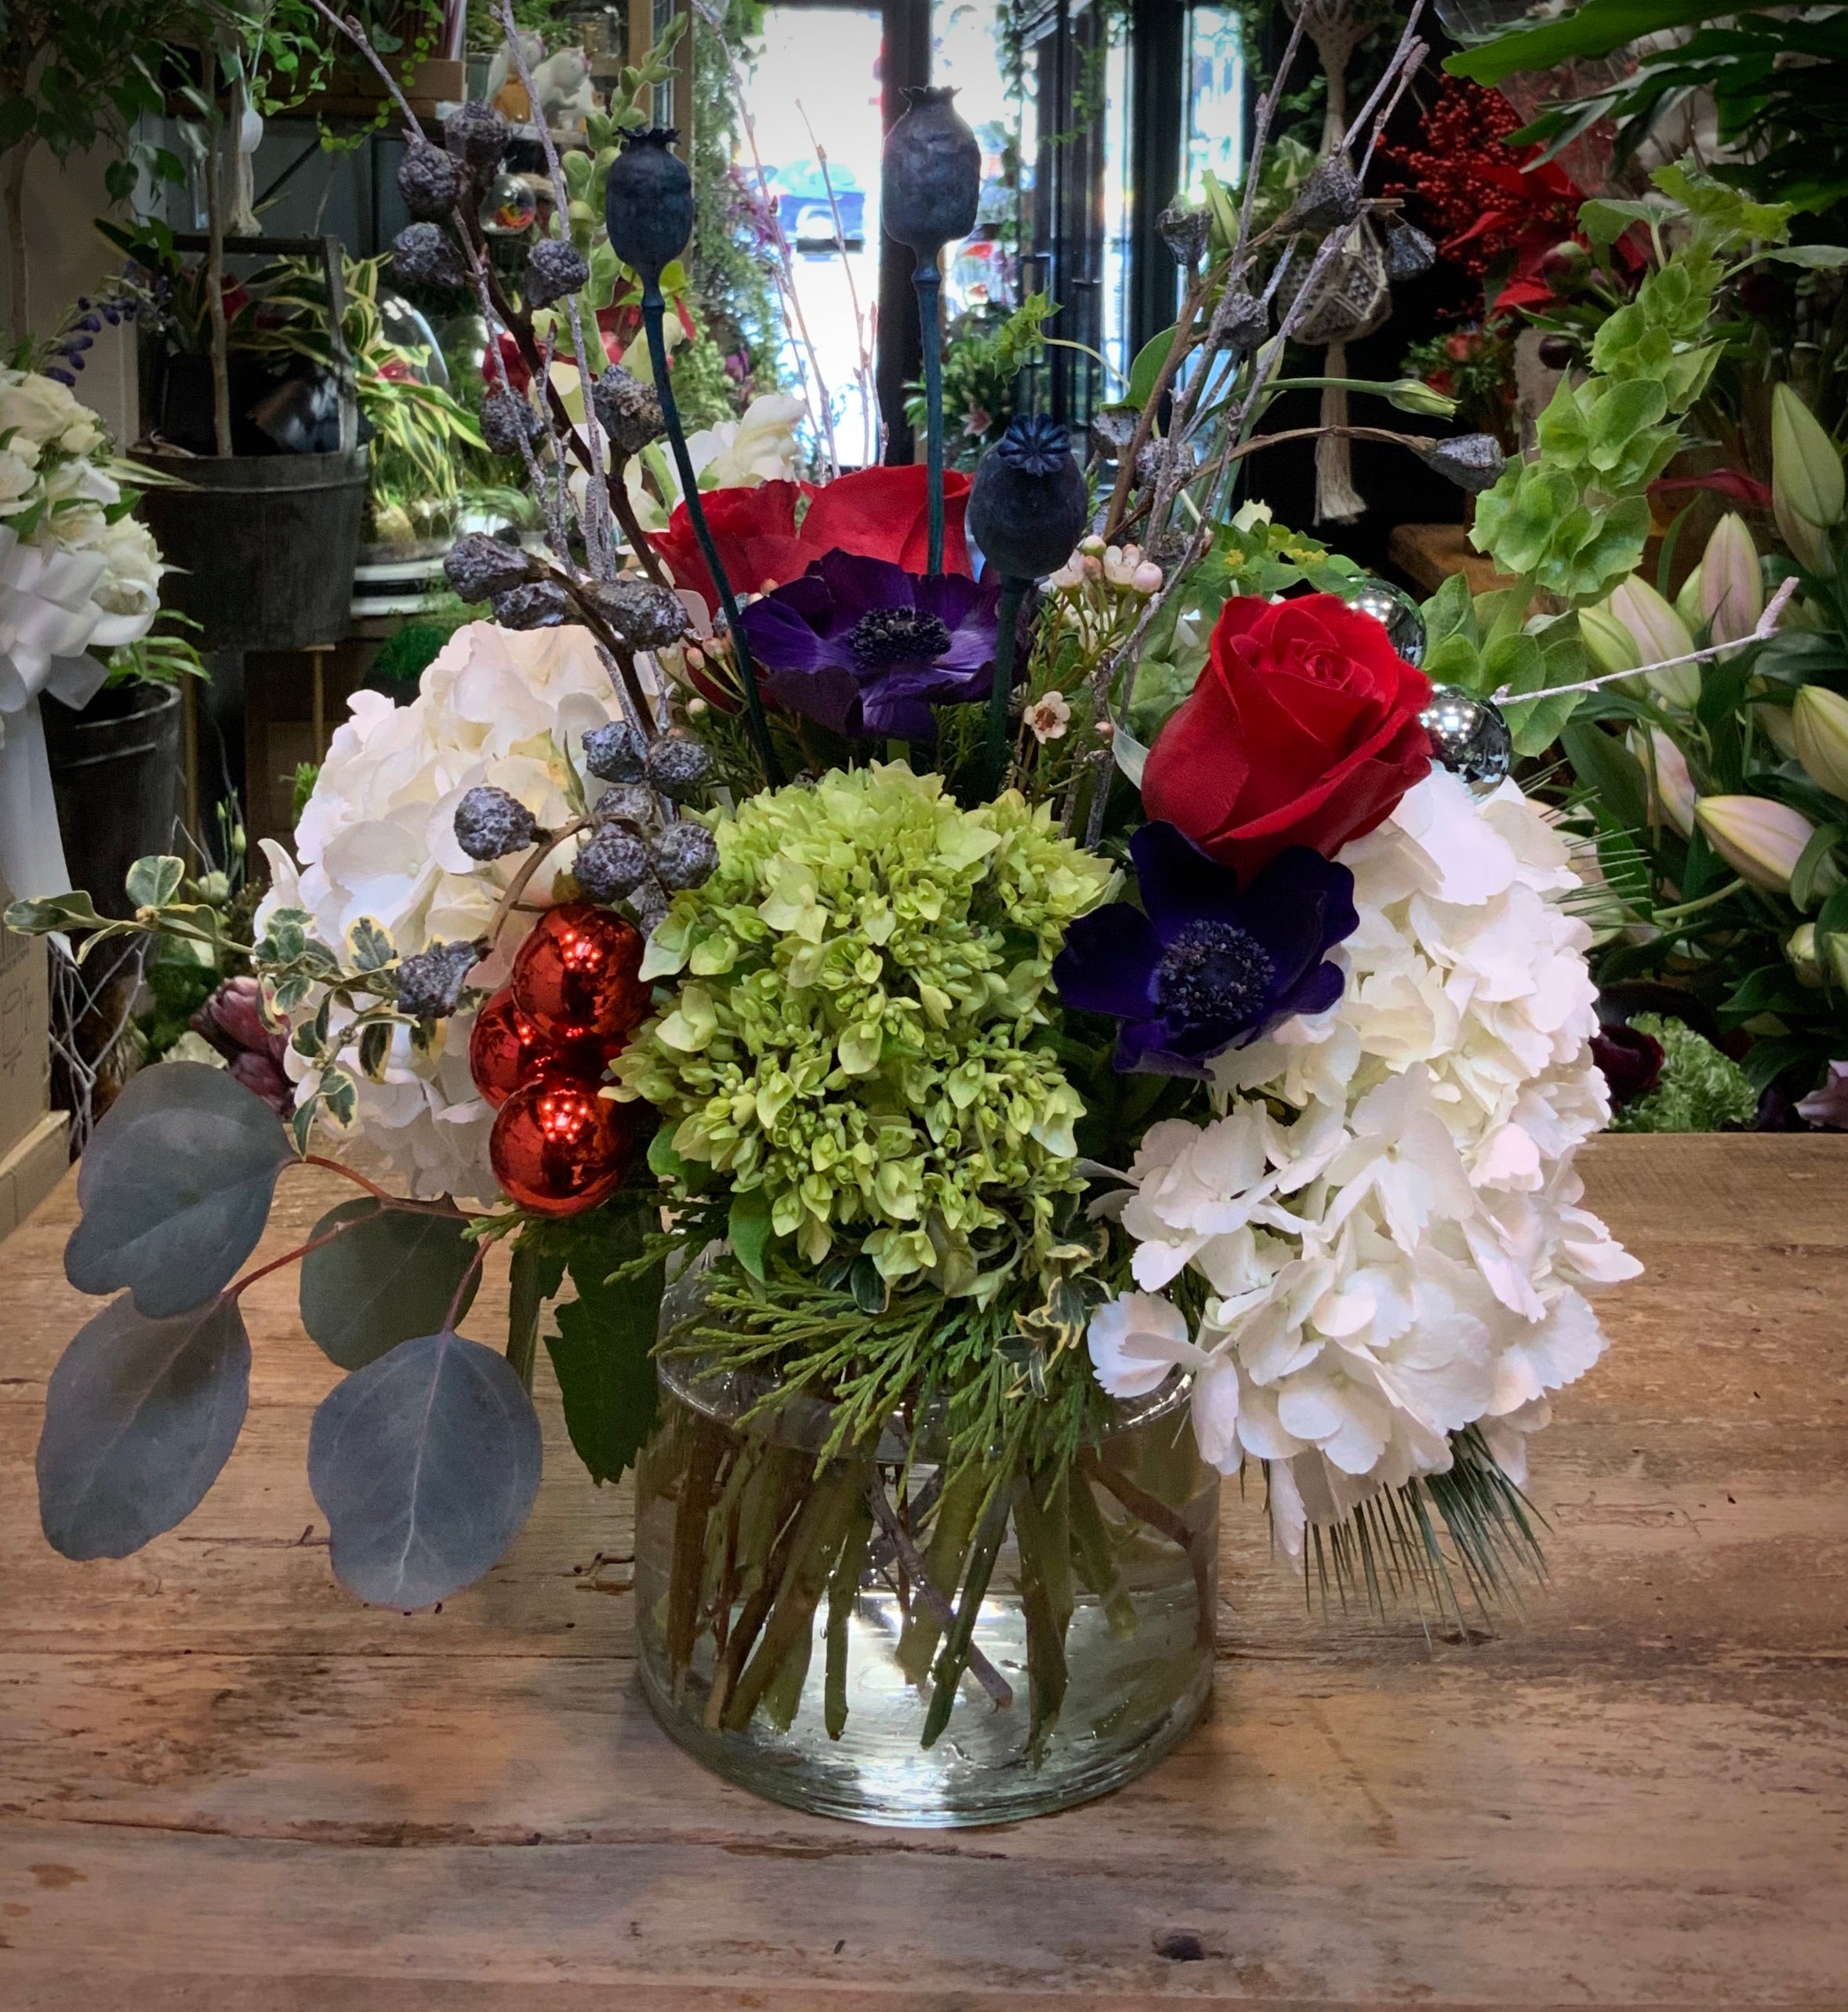 Warm & Cozy - Mixed Hydrangea with Red Roses and Bells of Ireland in a Glass Vase